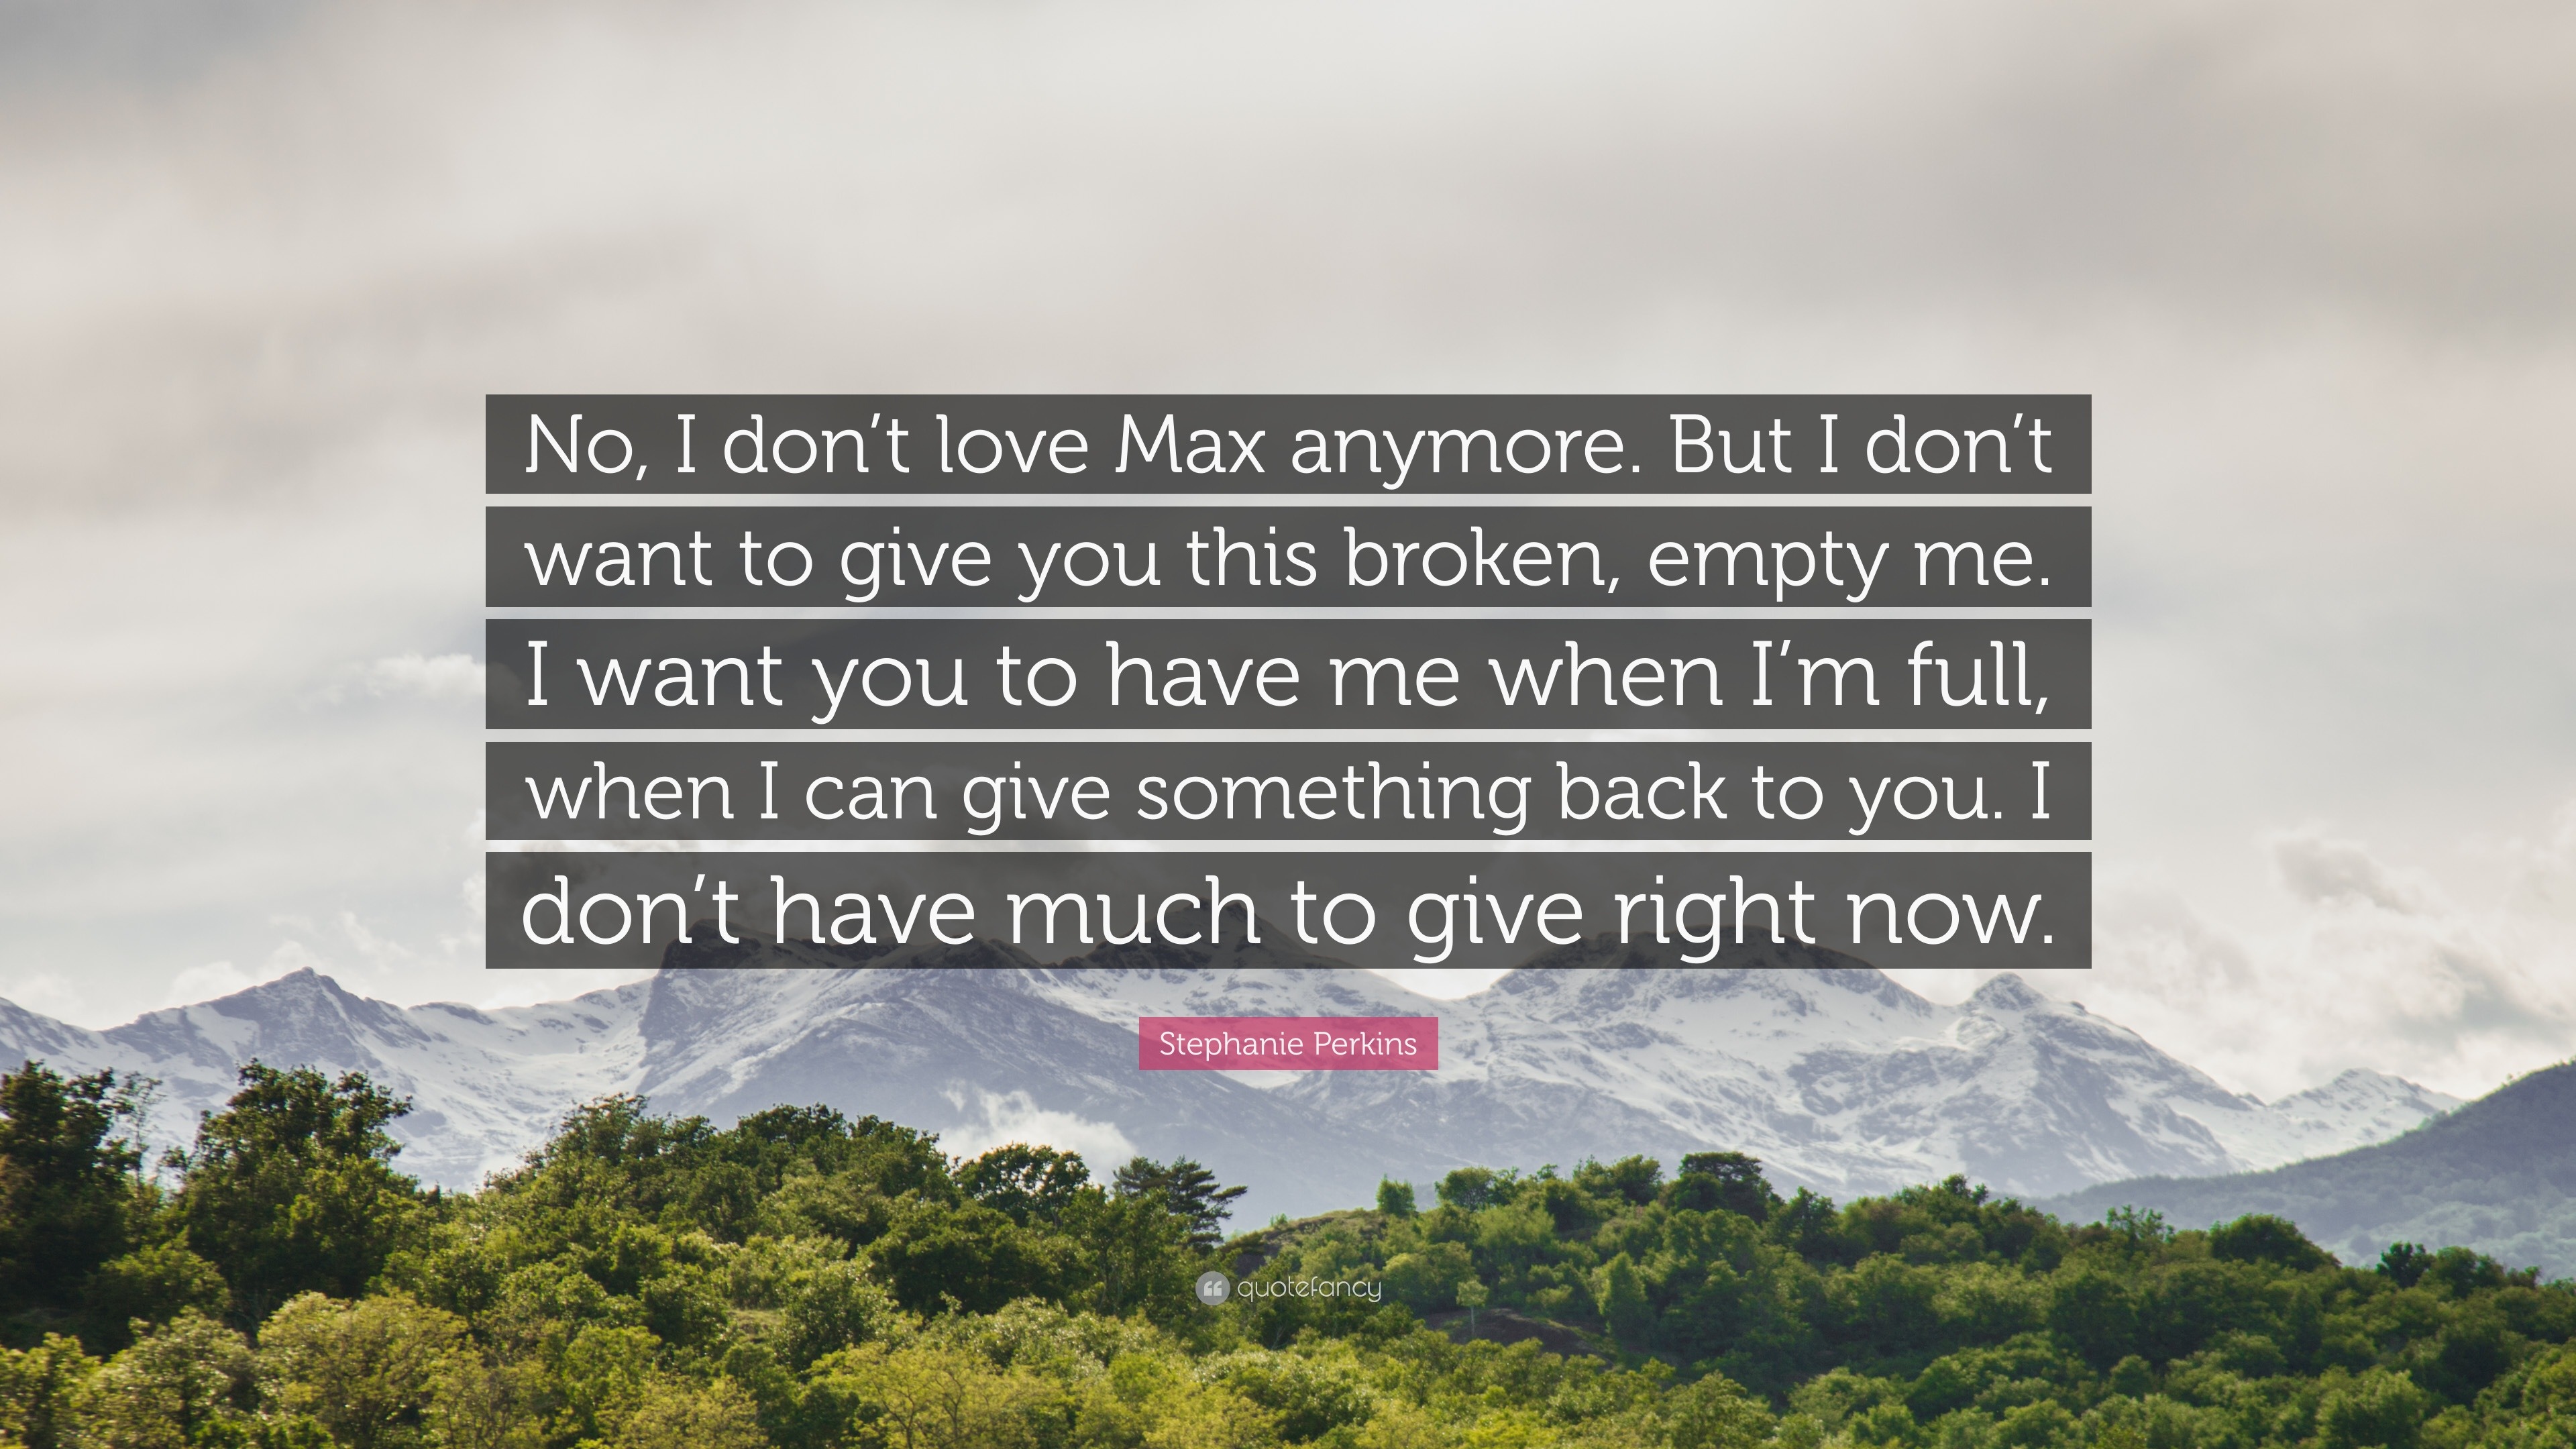 Stephanie Perkins Quote “No I don t love Max anymore But